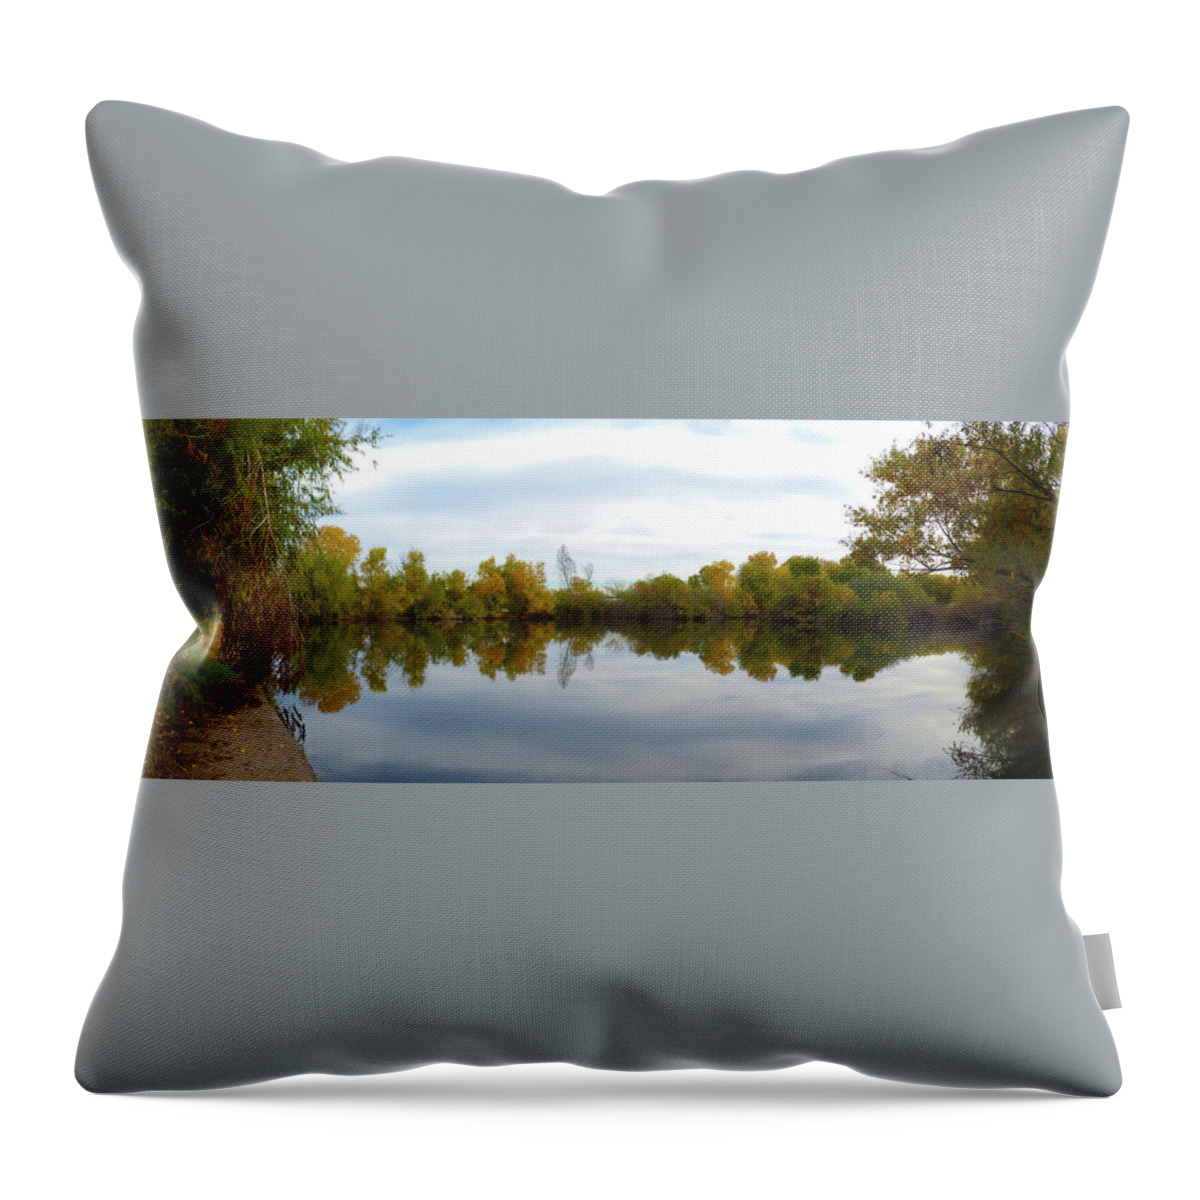 Orcinusfotograffy Throw Pillow featuring the photograph Numba Two Pond by Kimo Fernandez